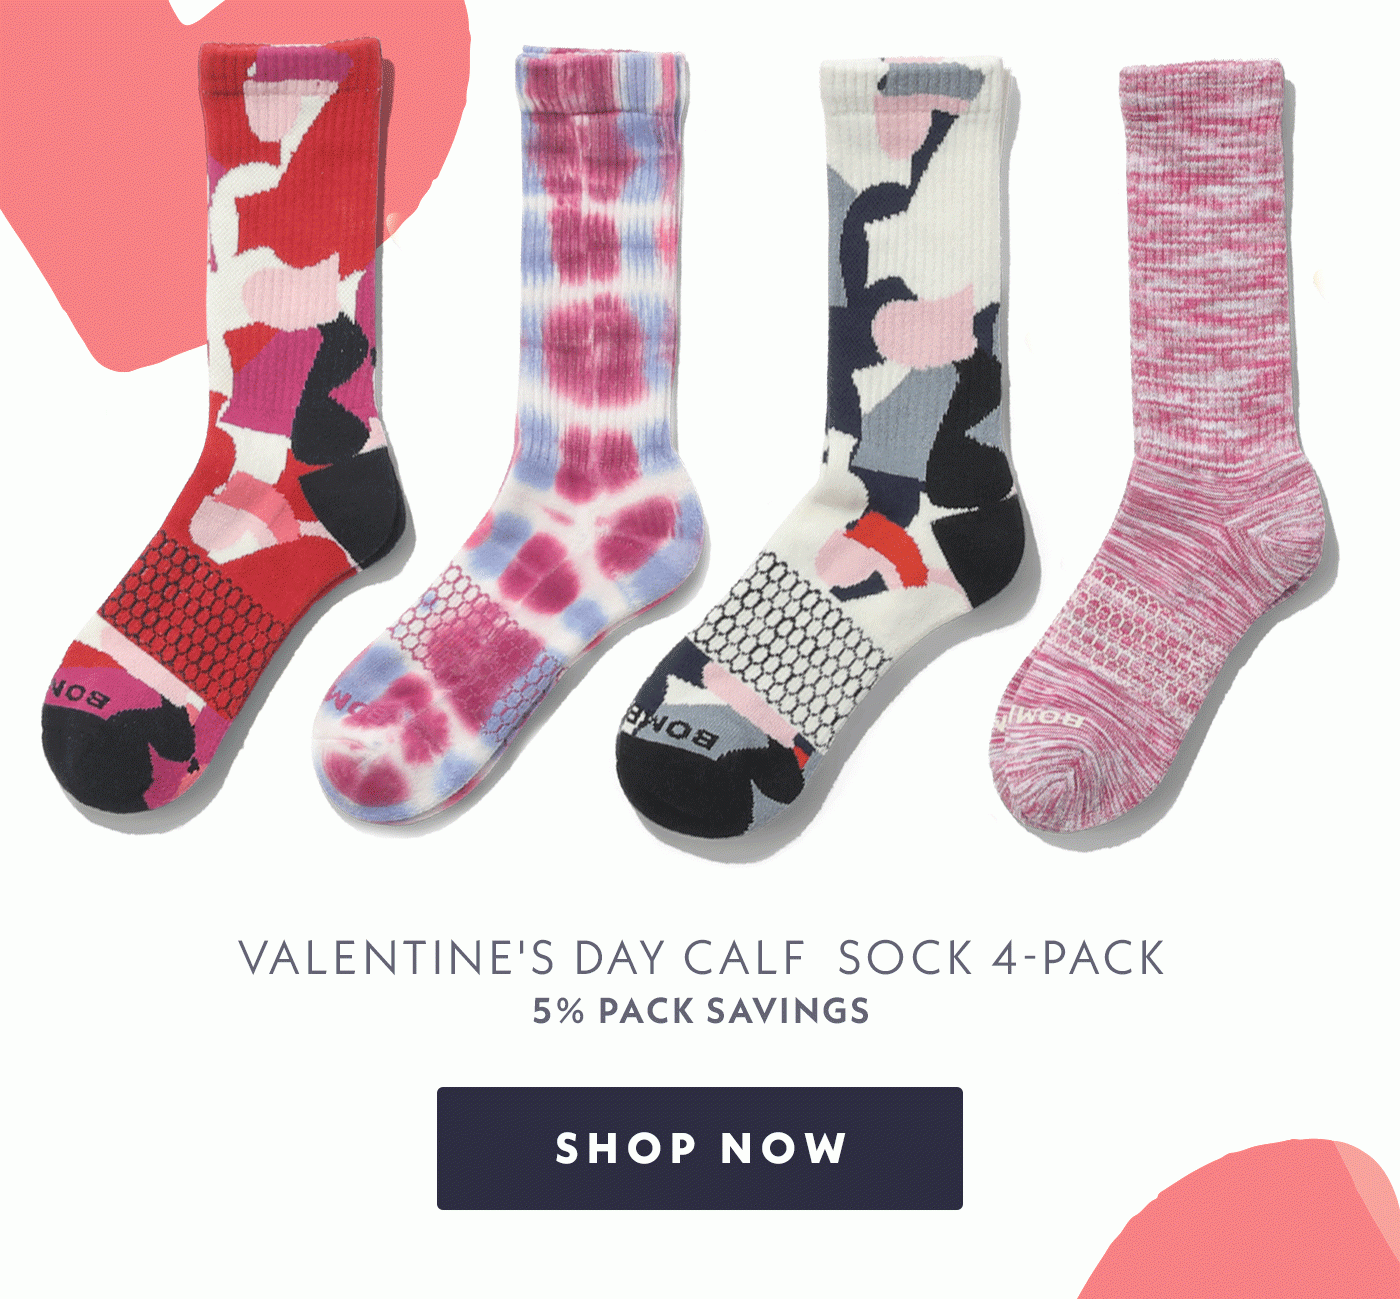 Valentine's Day Calf Sock 4-Pack | 5% Pack Savings | Shop Now